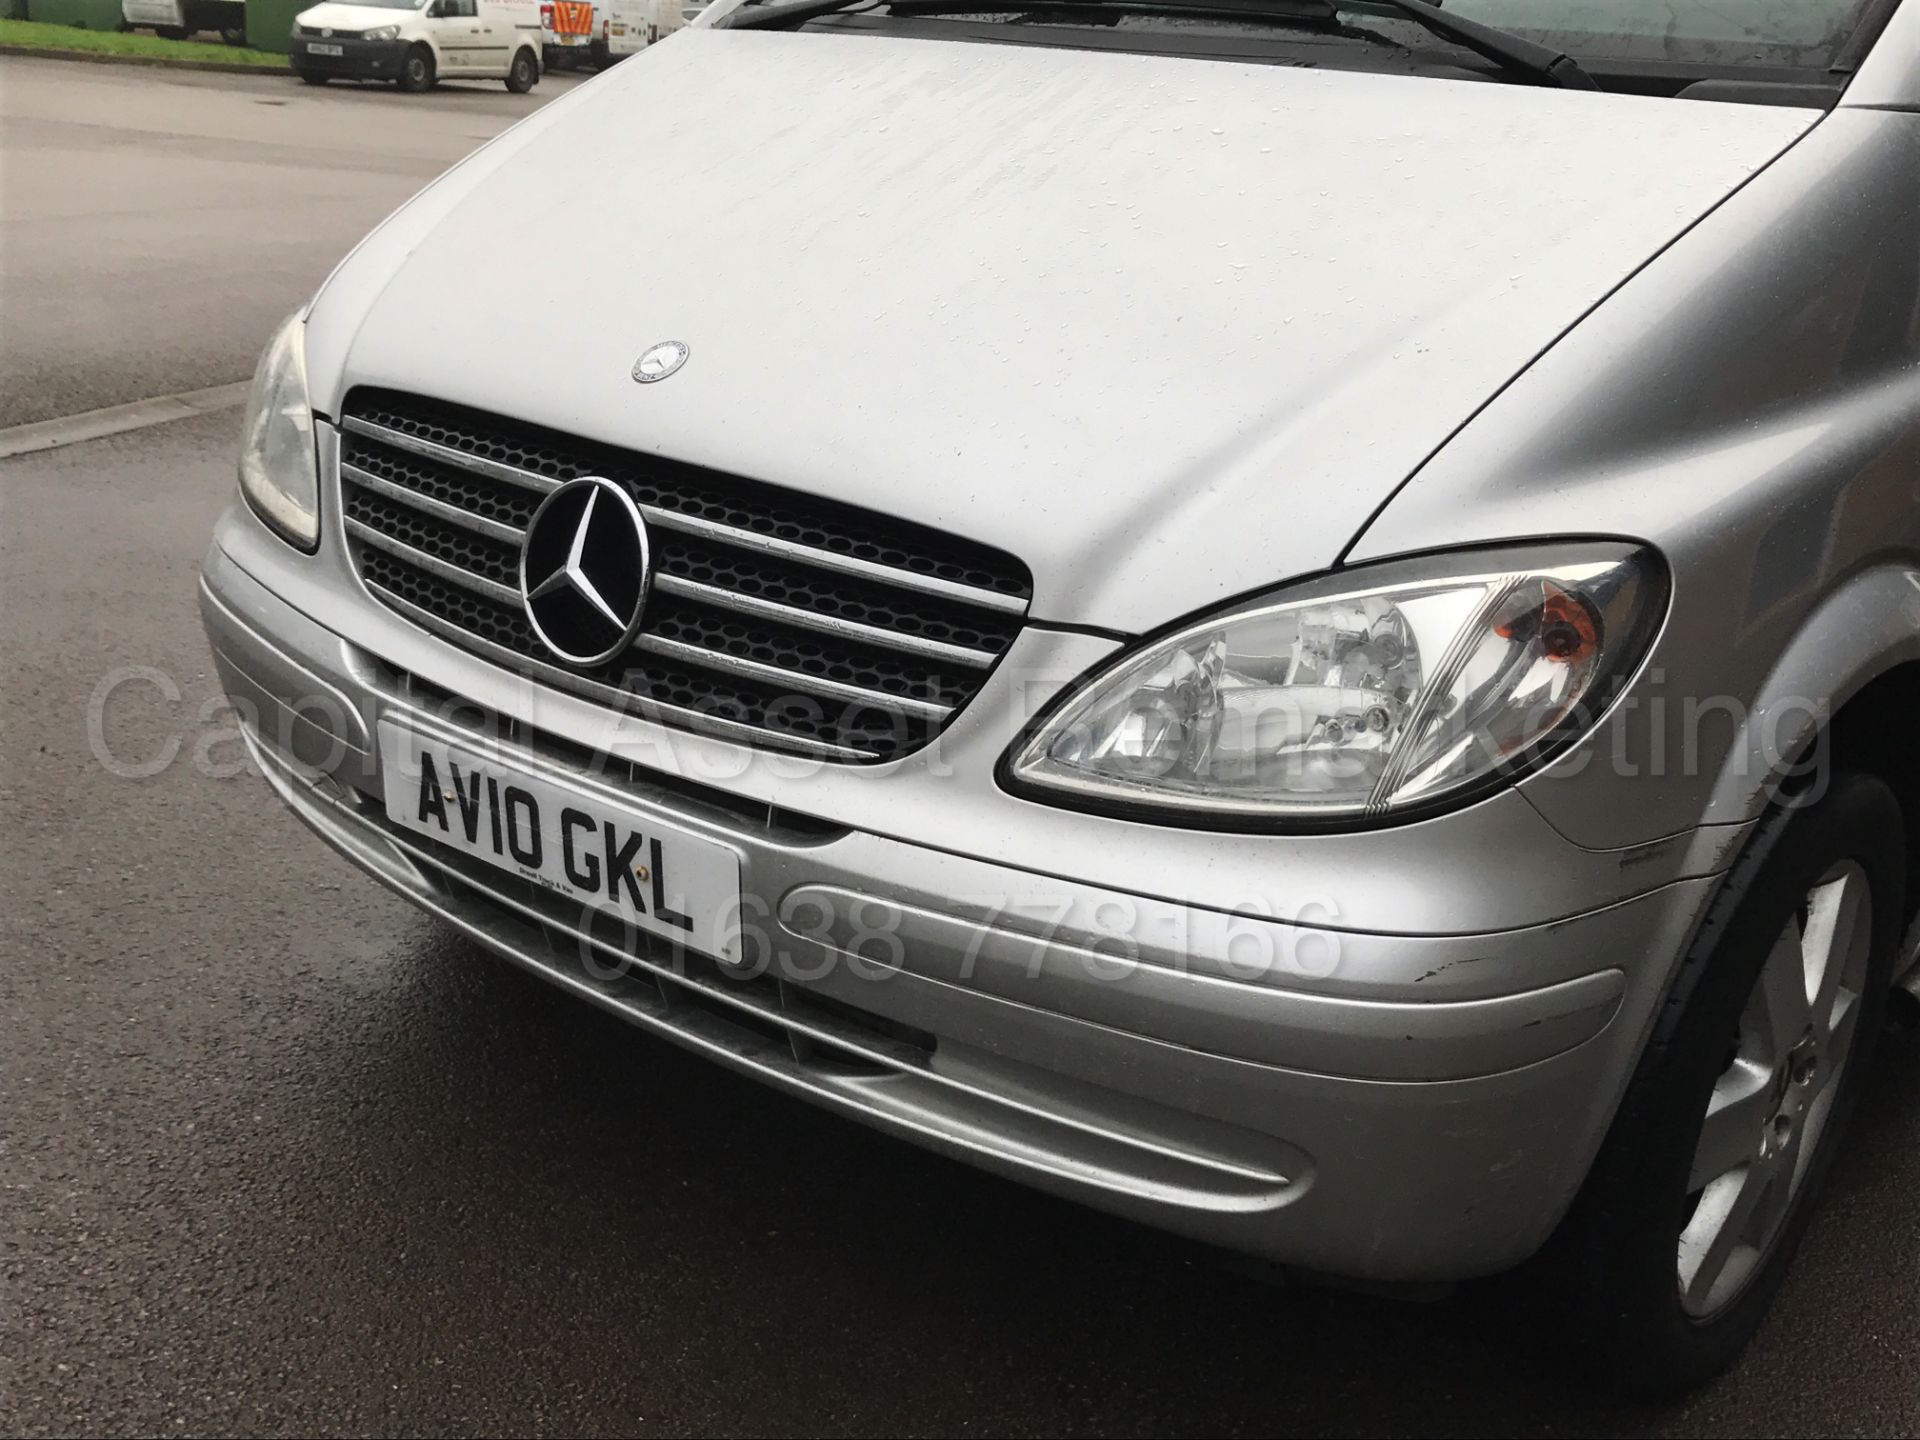 MERCEDES VITO *SPORT* '5 SEATER DUELINER' (2010 - 10 REG) '2.1 CDI - 150 BHP - 6 SPEED' **AIR CON** - Image 13 of 35